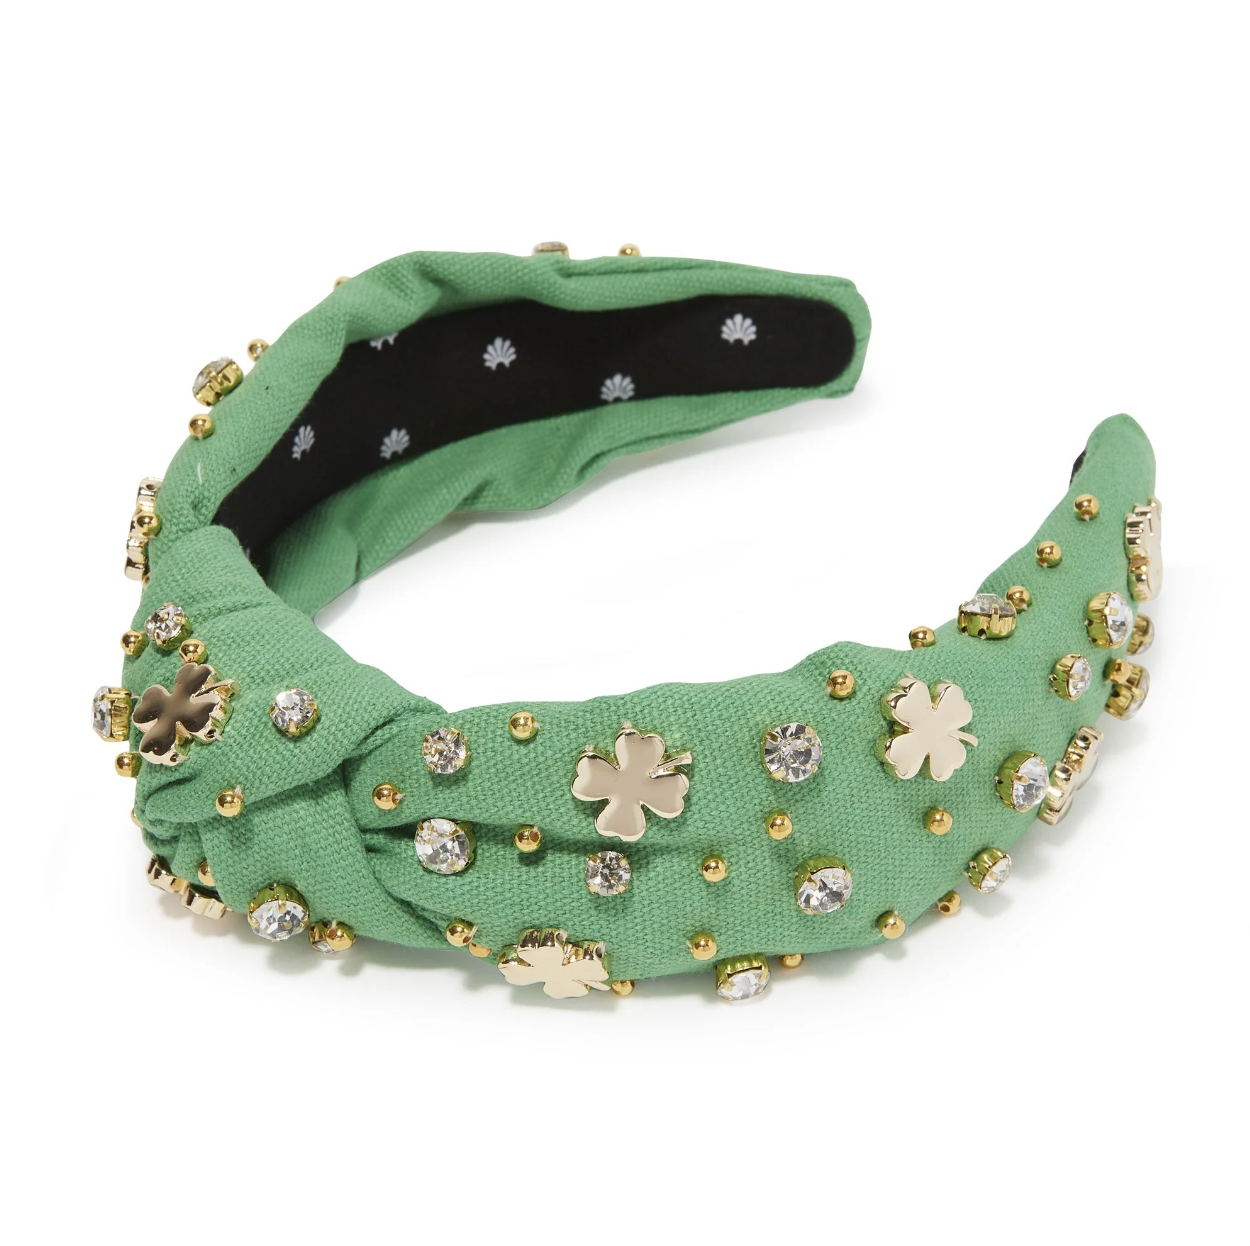 12 Green Hair Accessories Perfect for St. Patrick's Day